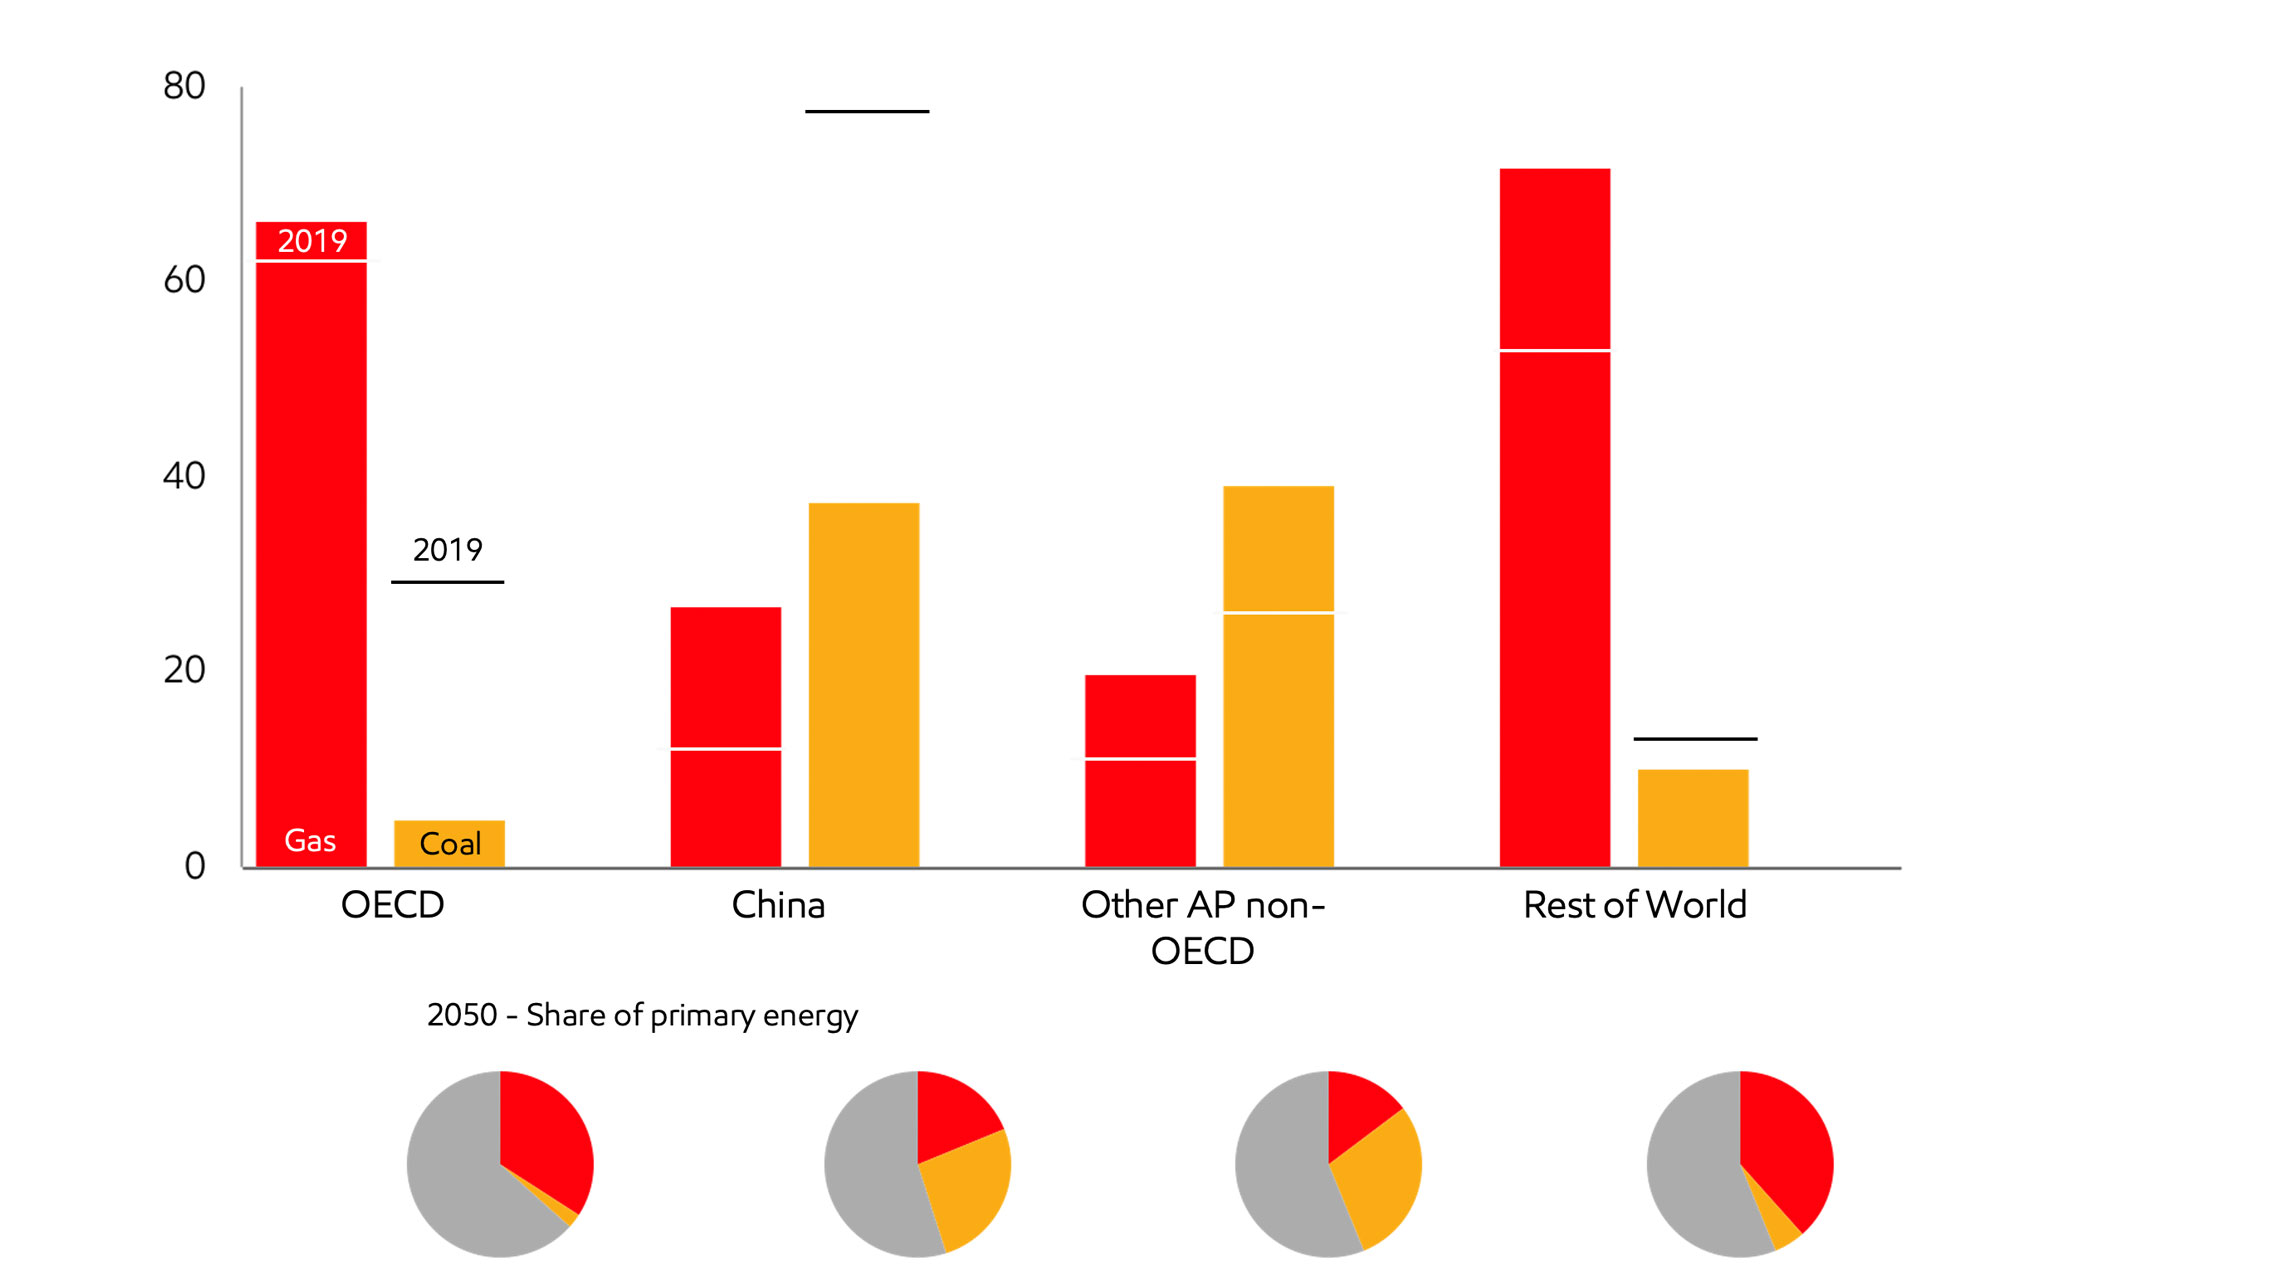 Image Natural gas is growing, but coal is still predominant in non-OECD Asia